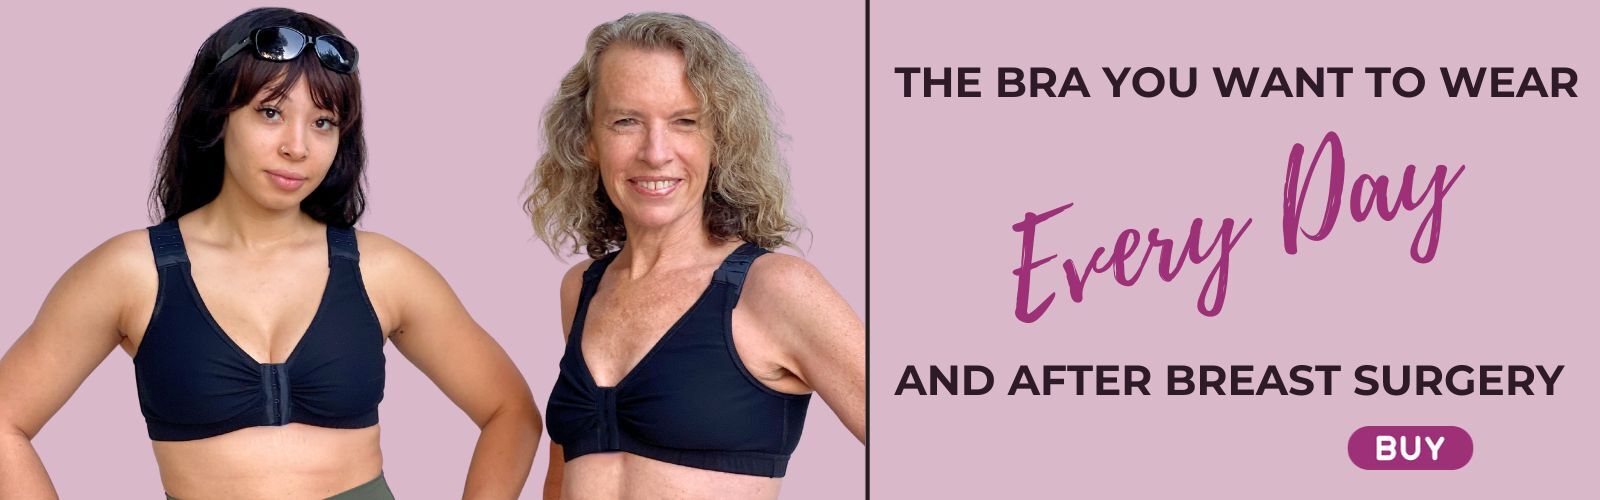 Learn about Shopping for Bras after Breast Reconstruction with